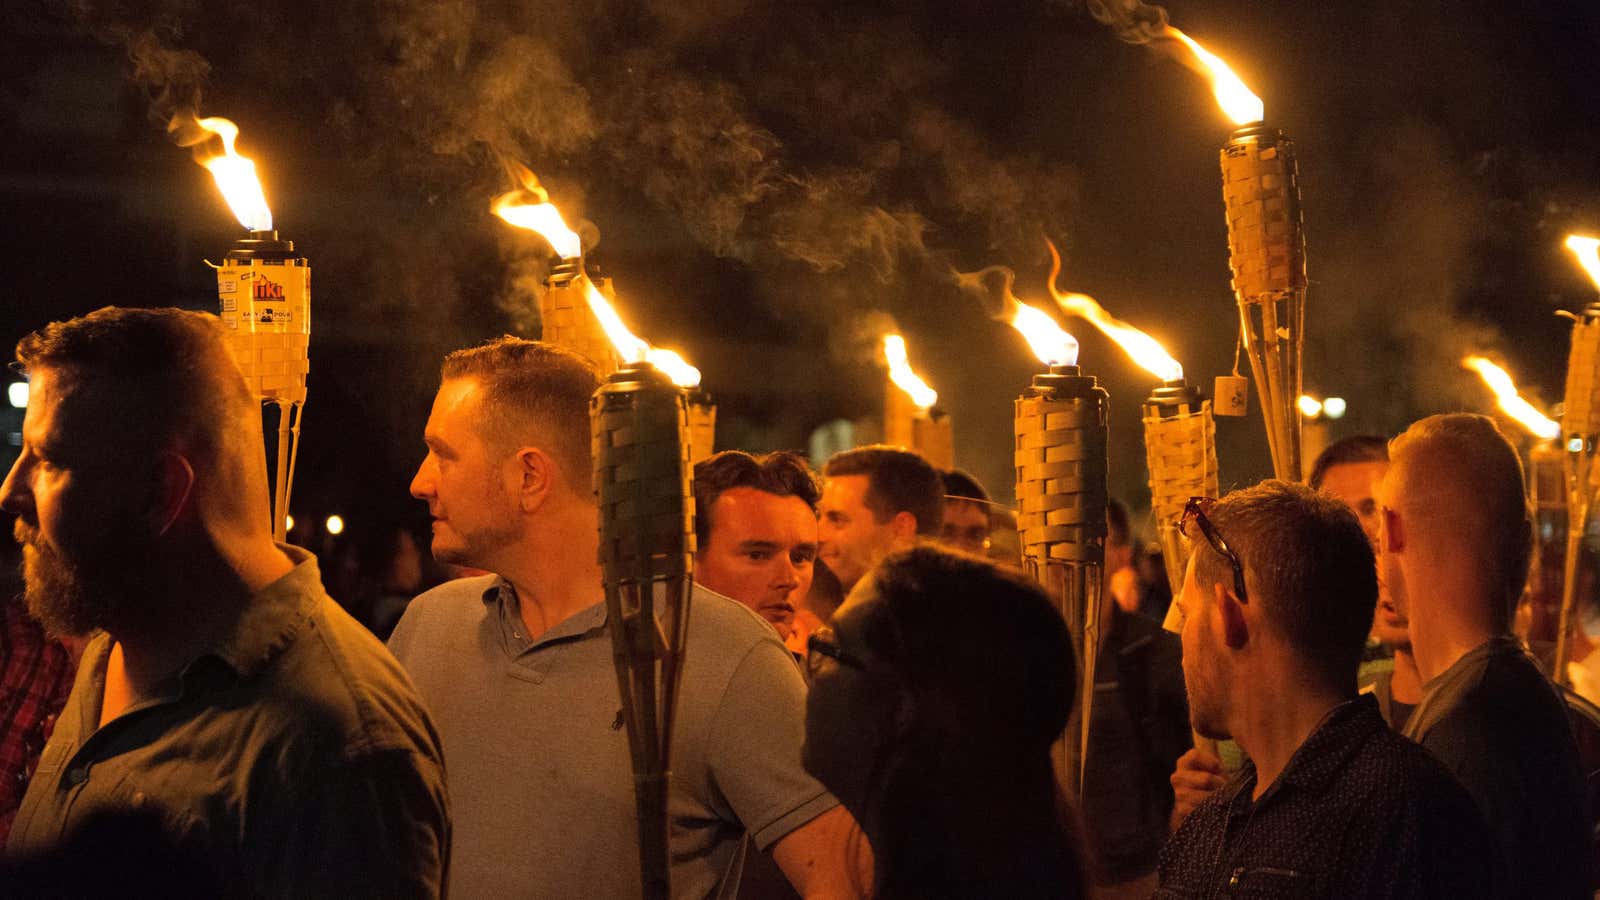 A philosophical principle coined in 1945 could be a key defense against white supremacists